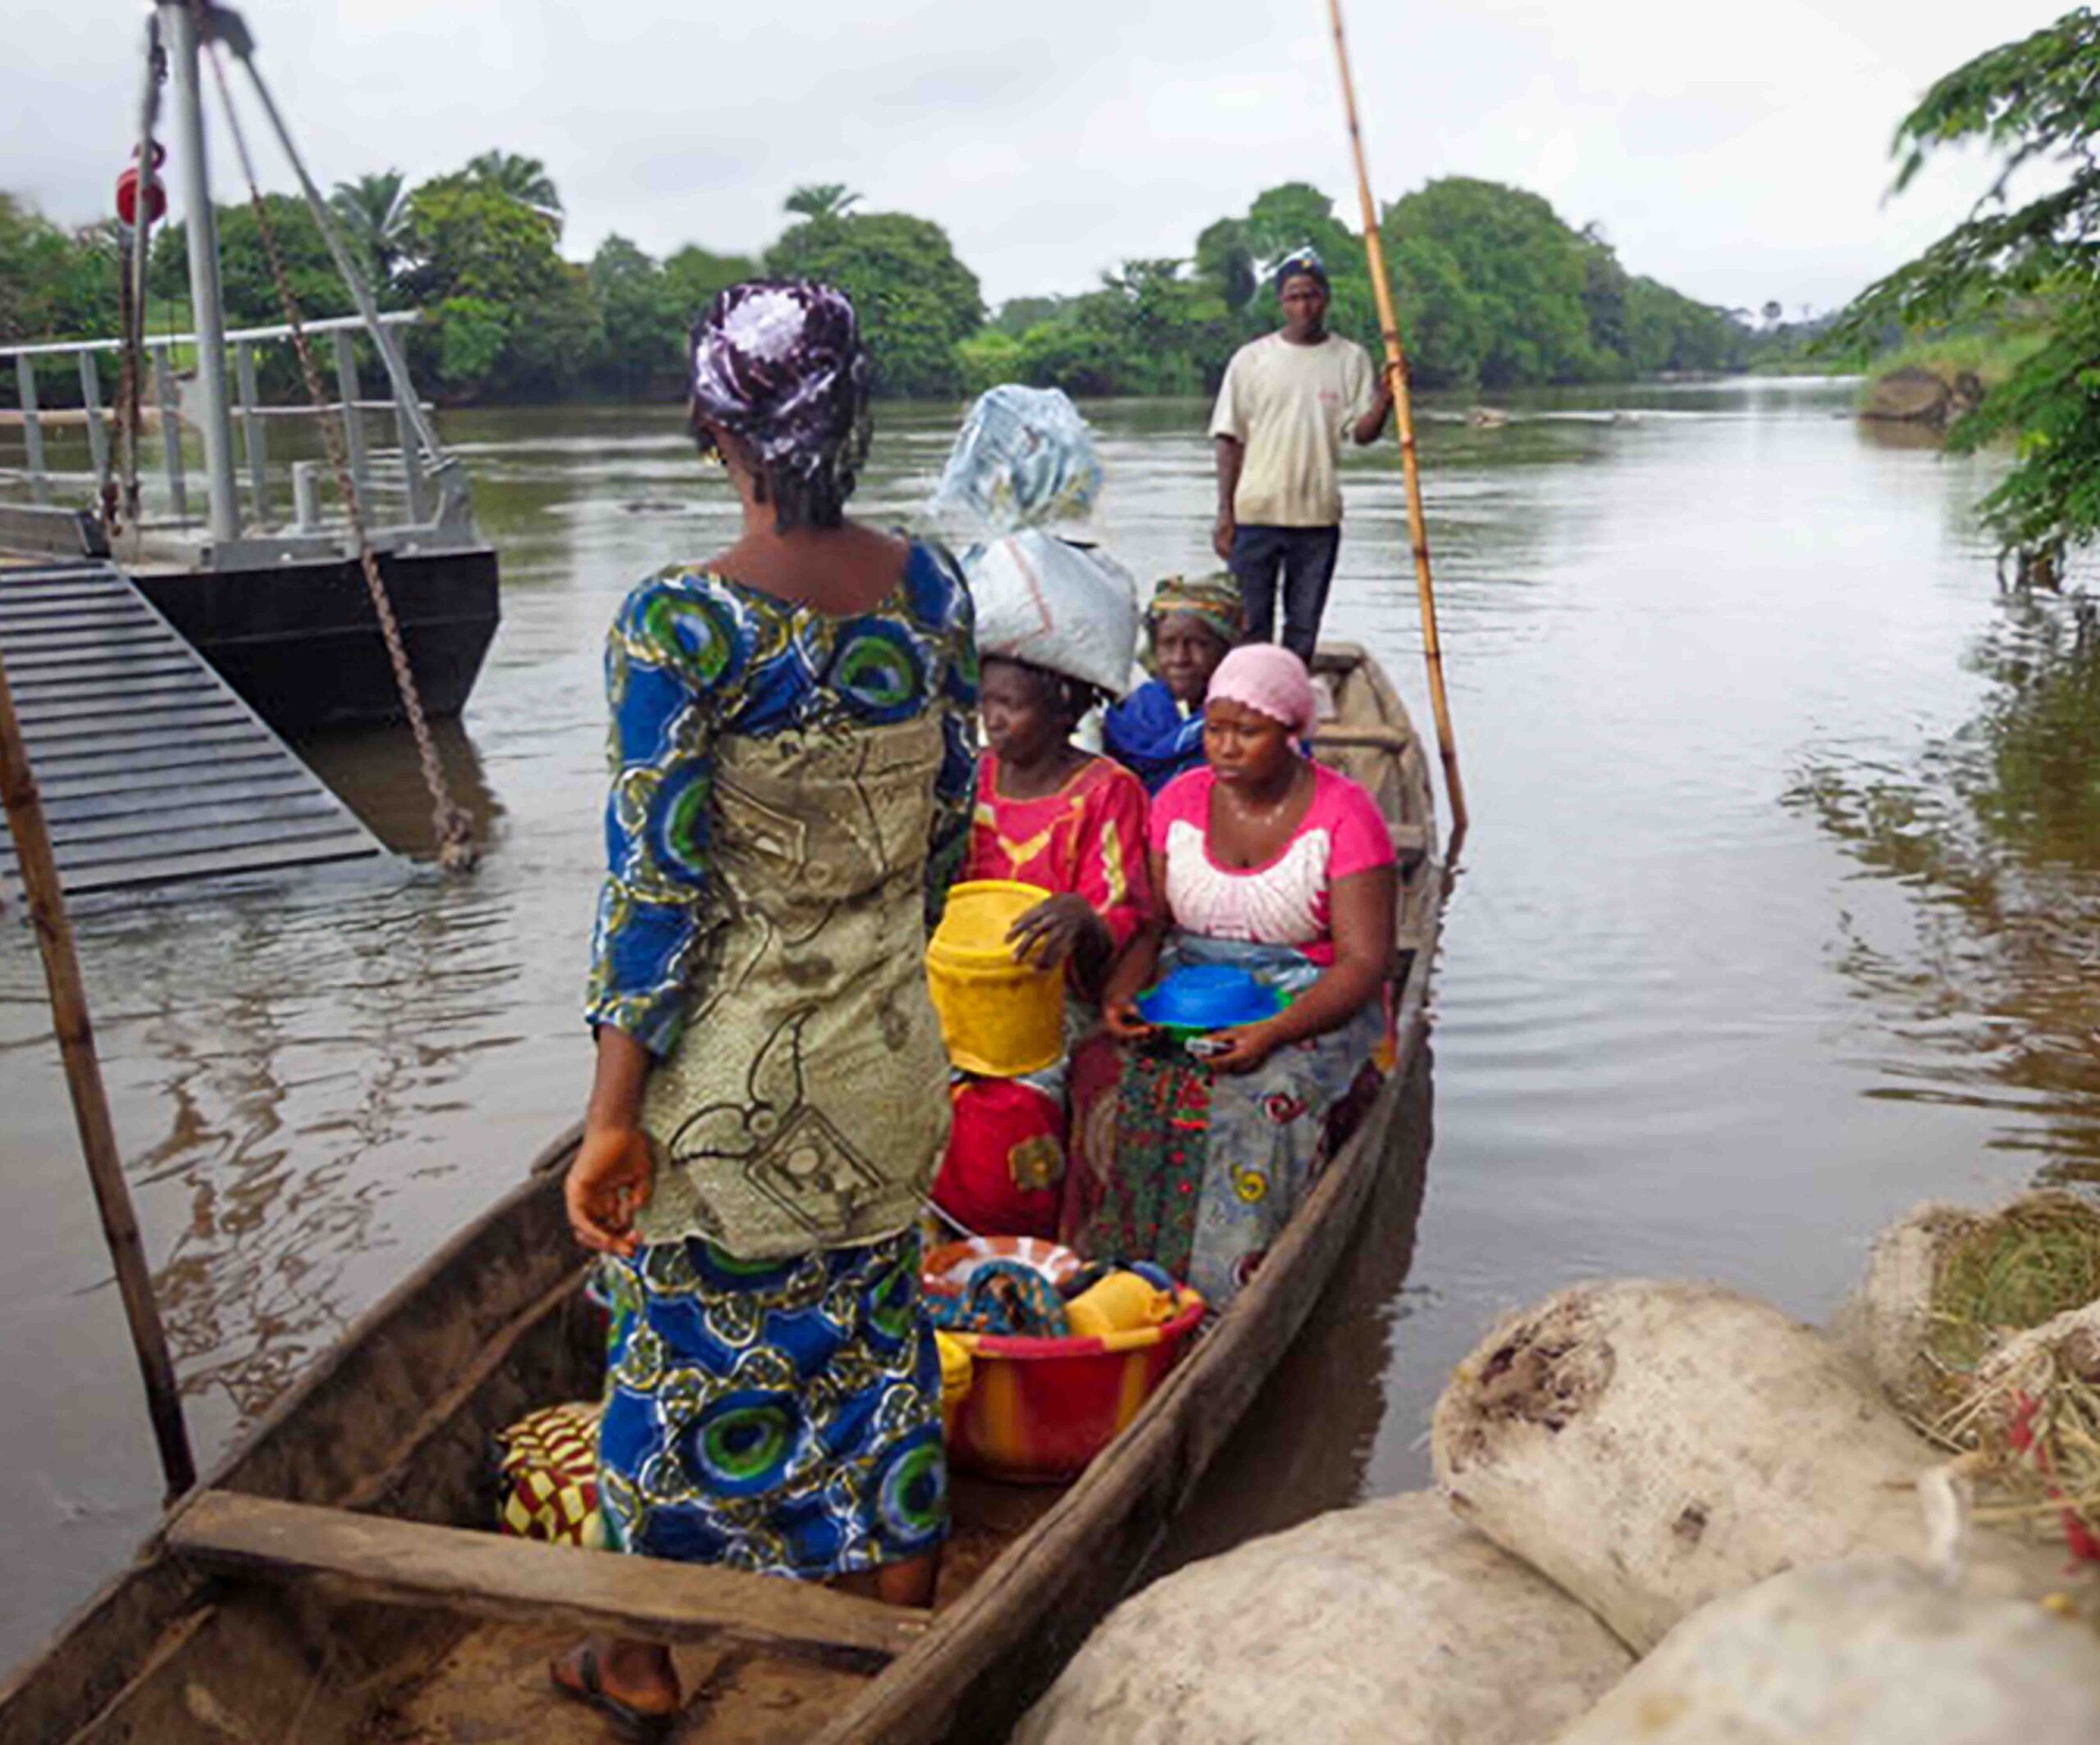 Women Cross-Border Traders from Sierra Leone Managed to Improve Their Business by Learning from Other Women in East Africa Involved in a Similar Economic Environments